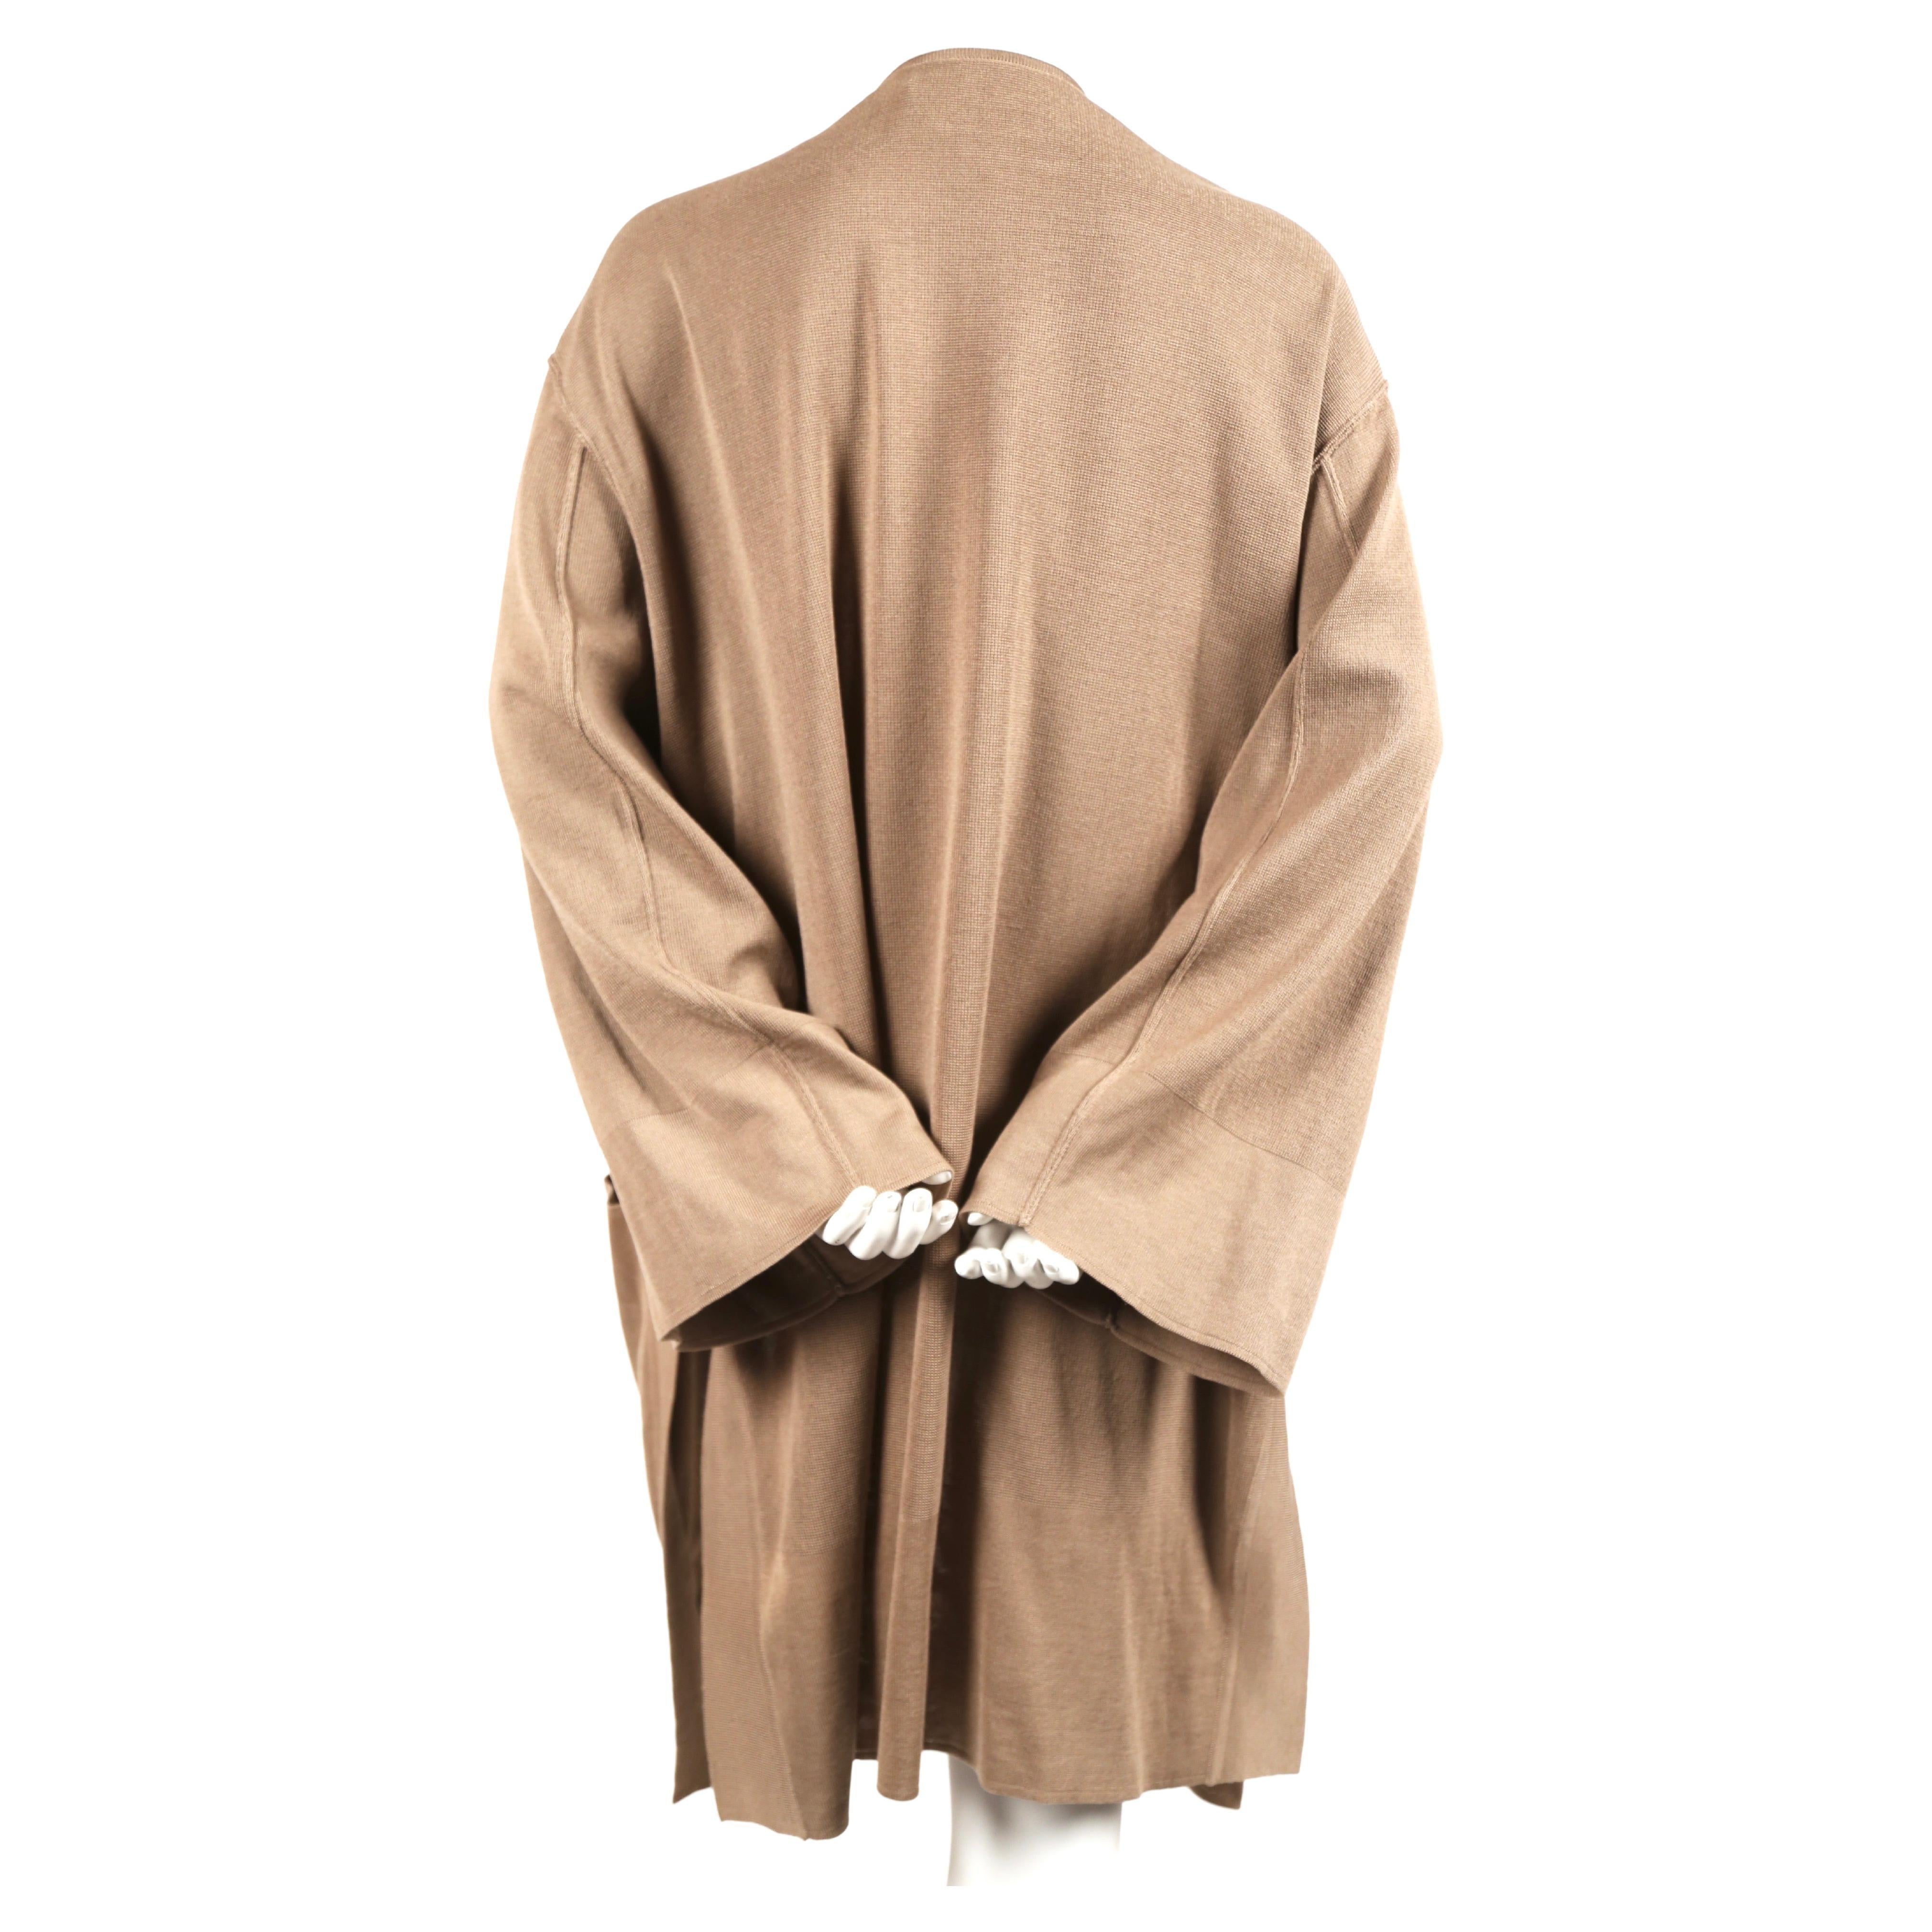 1985 AZZEDINE ALAIA oversized tan cardigan sweater coat with pockets For Sale 1